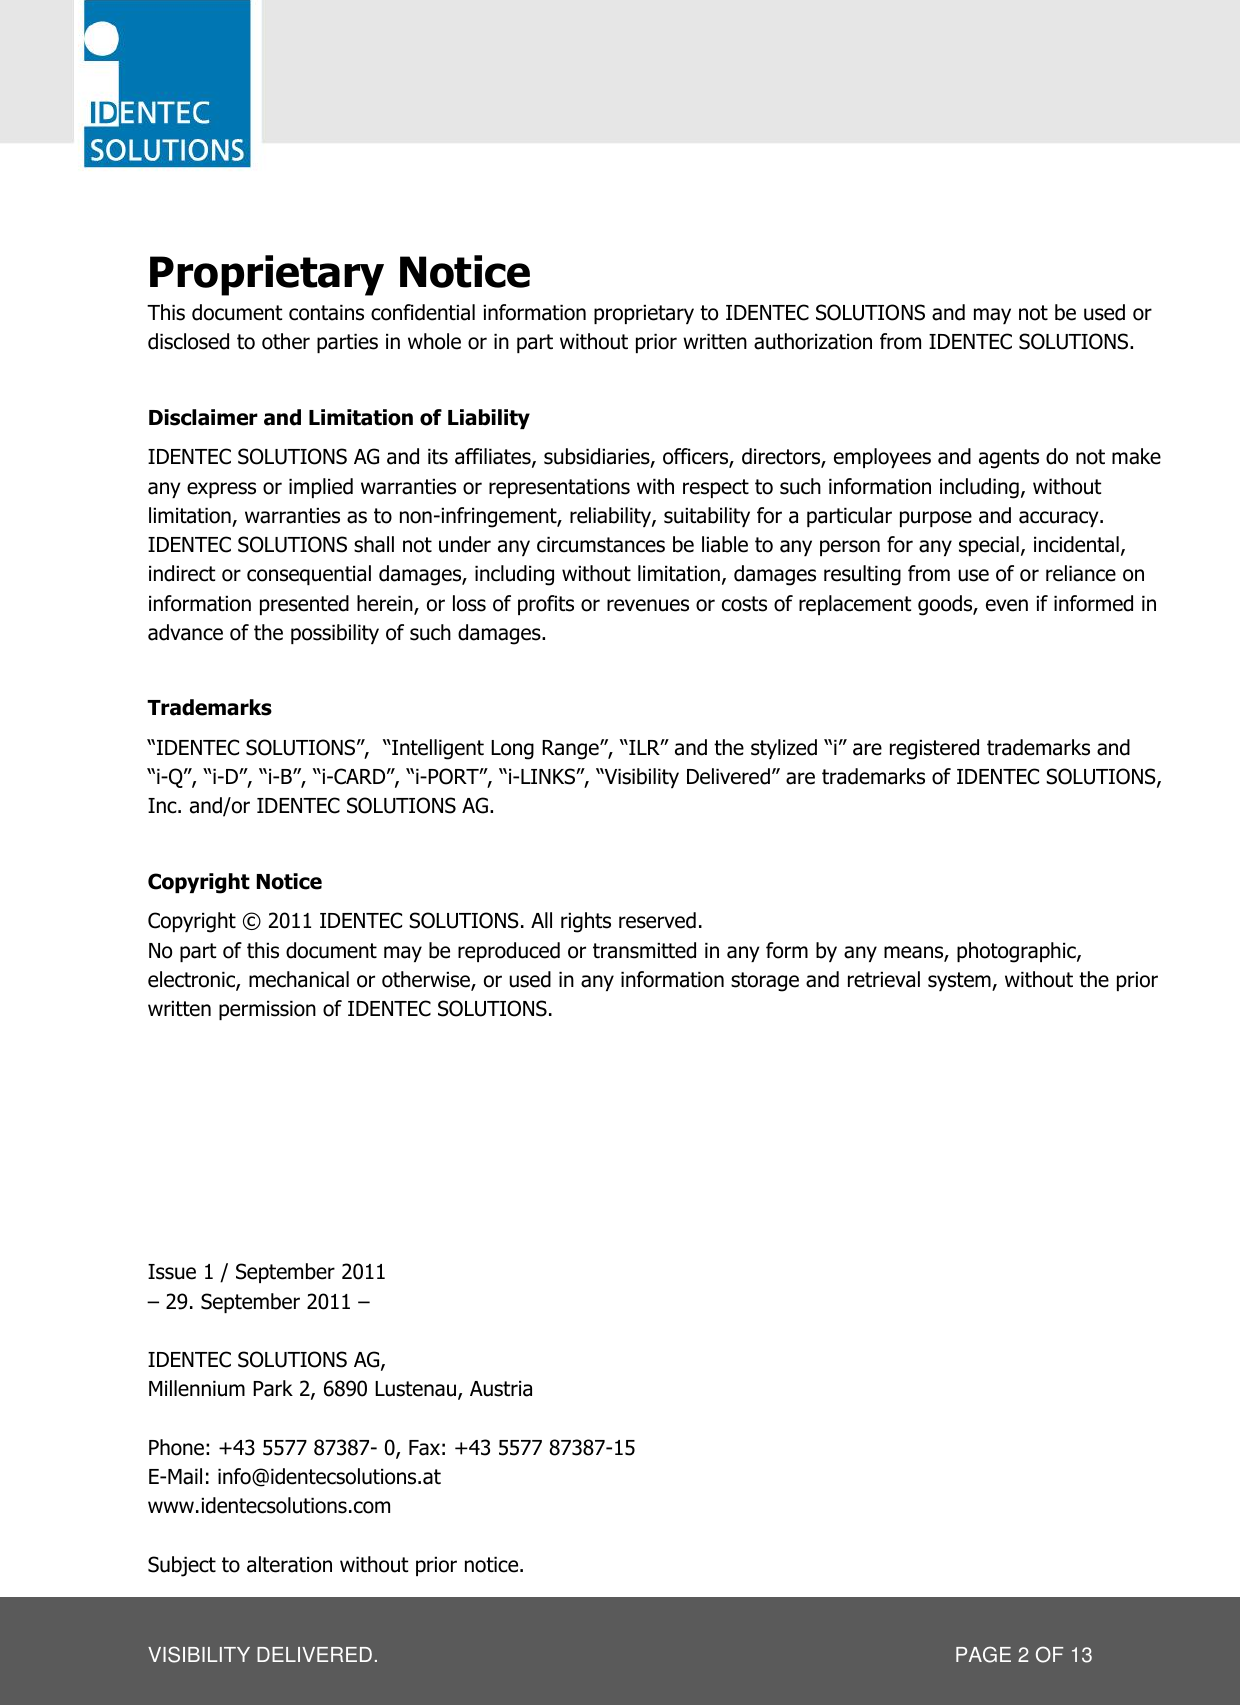   VISIBILITY DELIVERED.  PAGE 2 OF 13  Proprietary Notice This document contains confidential information proprietary to IDENTEC SOLUTIONS and may not be used or disclosed to other parties in whole or in part without prior written authorization from IDENTEC SOLUTIONS.  Disclaimer and Limitation of Liability IDENTEC SOLUTIONS AG and its affiliates, subsidiaries, officers, directors, employees and agents do not make any express or implied warranties or representations with respect to such information including, without limitation, warranties as to non-infringement, reliability, suitability for a particular purpose and accuracy. IDENTEC SOLUTIONS shall not under any circumstances be liable to any person for any special, incidental, indirect or consequential damages, including without limitation, damages resulting from use of or reliance on information presented herein, or loss of profits or revenues or costs of replacement goods, even if informed in advance of the possibility of such damages.  Trademarks ―IDENTEC SOLUTIONS‖,  ―Intelligent Long Range‖, ―ILR‖ and the stylized ―i‖ are registered trademarks and  ―i-Q‖, ―i-D‖, ―i-B‖, ―i-CARD‖, ―i-PORT‖, ―i-LINKS‖, ―Visibility Delivered‖ are trademarks of IDENTEC SOLUTIONS, Inc. and/or IDENTEC SOLUTIONS AG.  Copyright Notice Copyright © 2011 IDENTEC SOLUTIONS. All rights reserved. No part of this document may be reproduced or transmitted in any form by any means, photographic, electronic, mechanical or otherwise, or used in any information storage and retrieval system, without the prior written permission of IDENTEC SOLUTIONS.         Issue 1 / September 2011 – 29. September 2011 –  IDENTEC SOLUTIONS AG,  Millennium Park 2, 6890 Lustenau, Austria  Phone: +43 5577 87387- 0, Fax: +43 5577 87387-15 E-Mail: info@identecsolutions.at www.identecsolutions.com  Subject to alteration without prior notice. 